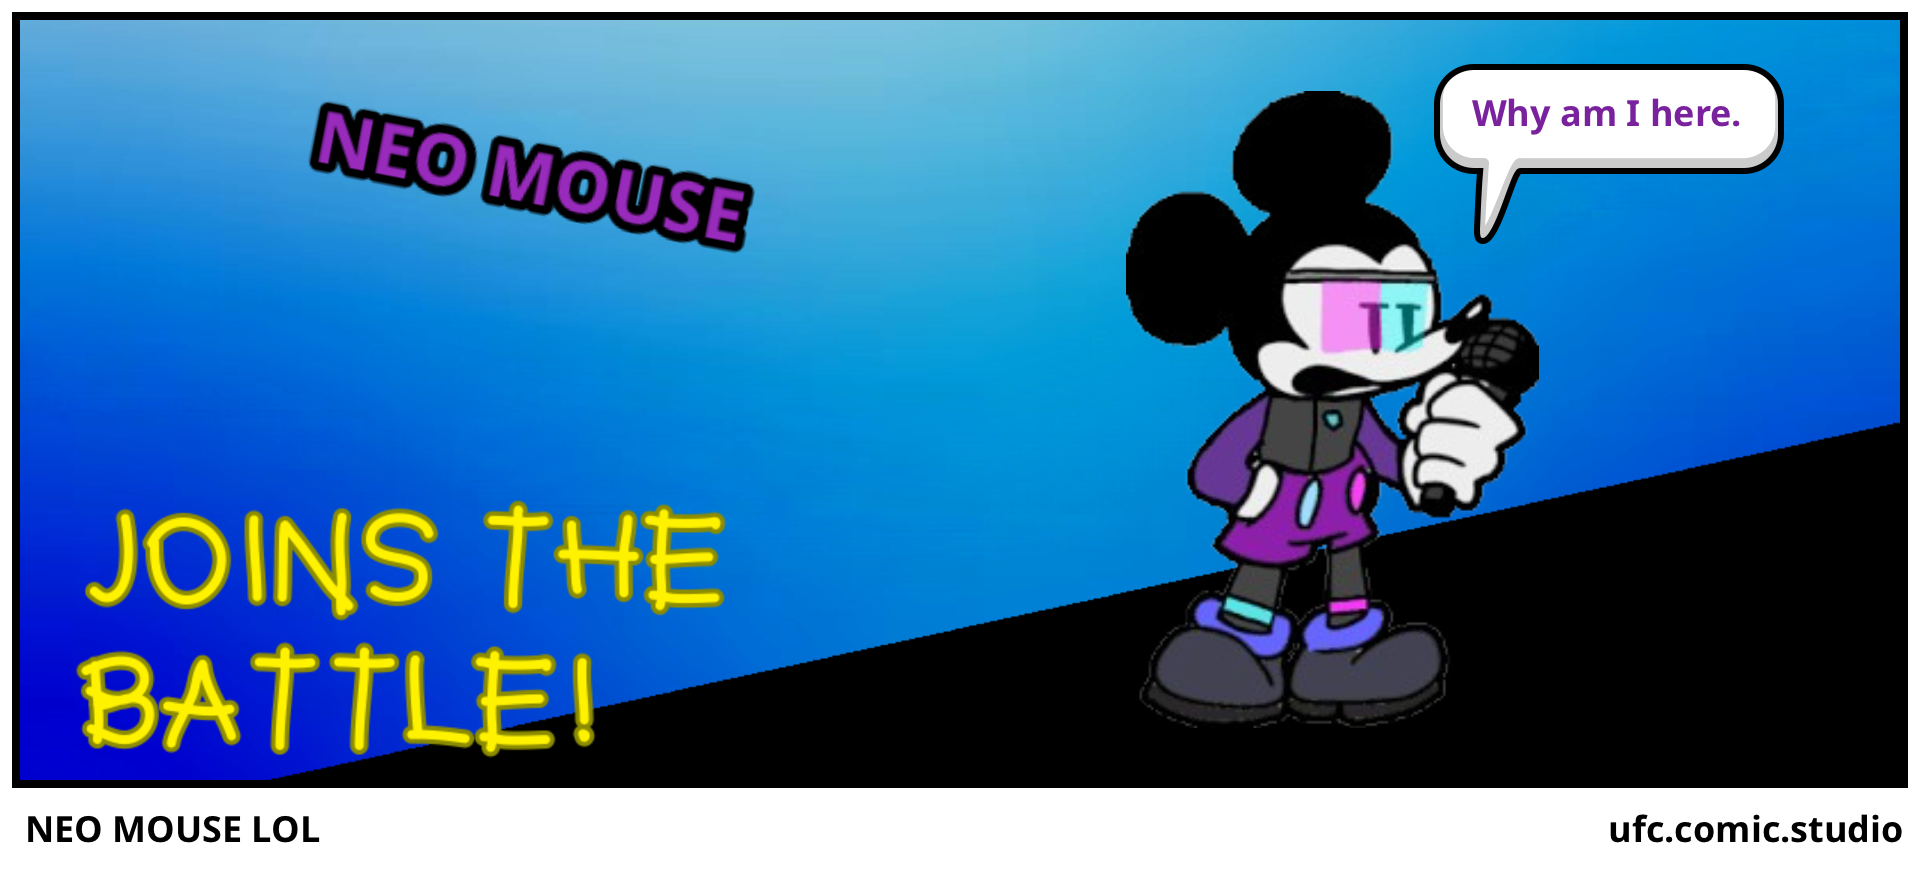  NEO MOUSE LOL